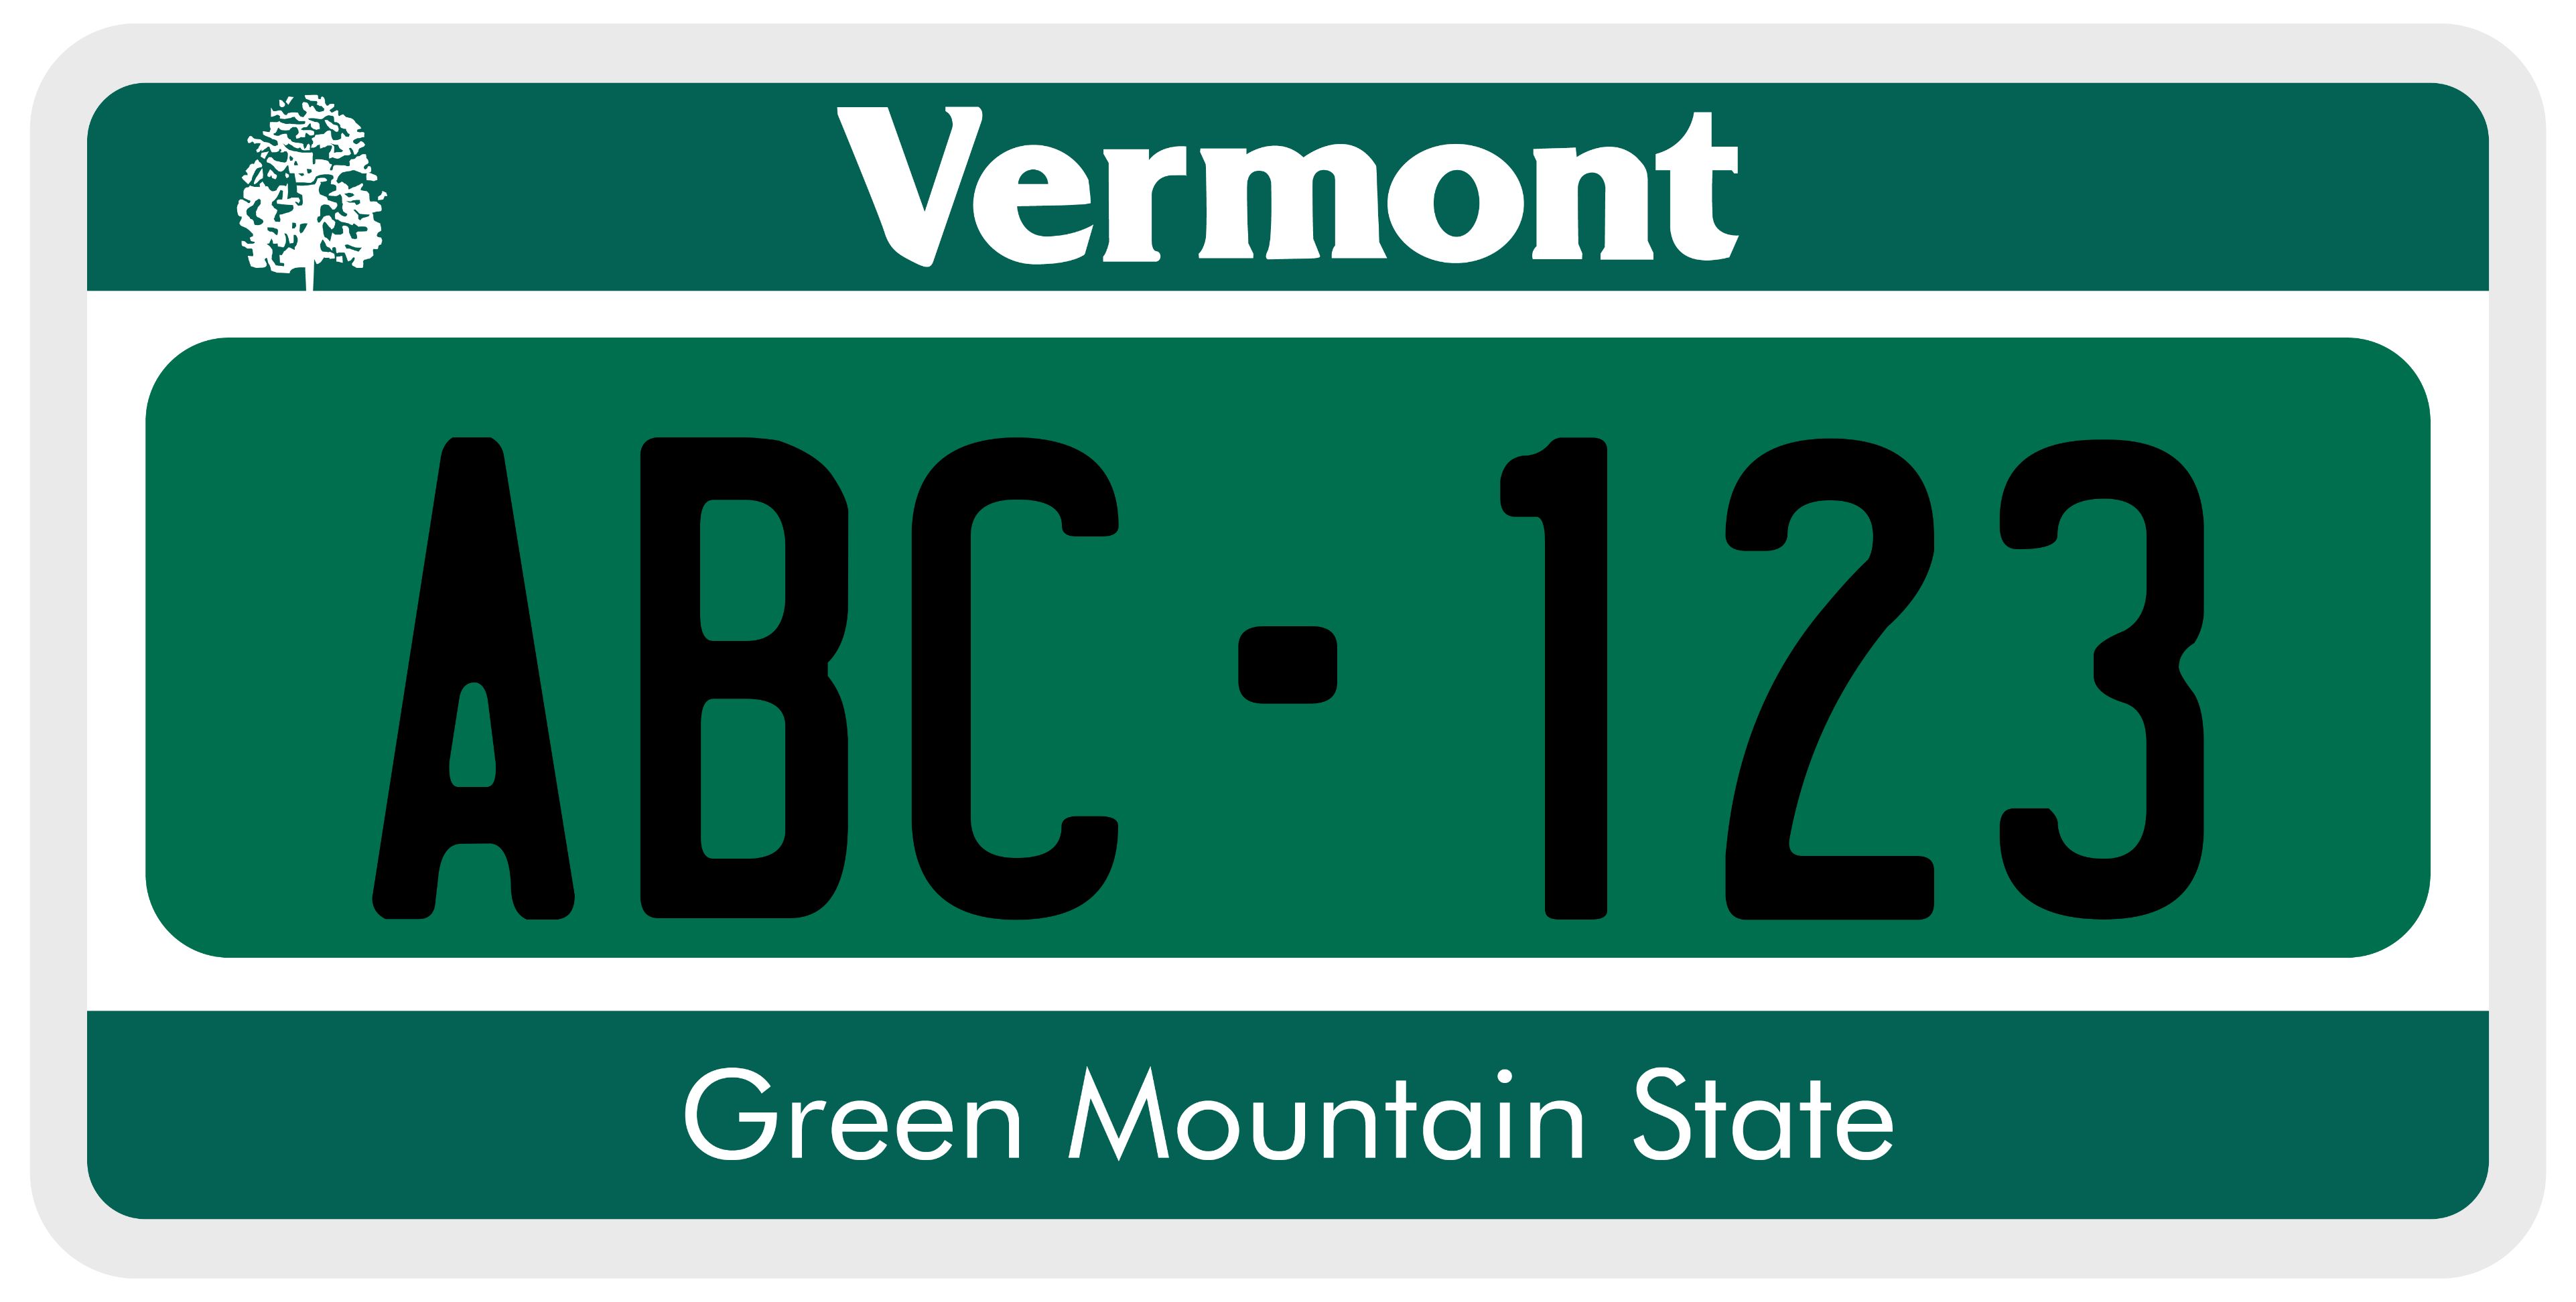 what does a Vermont license plate look like?